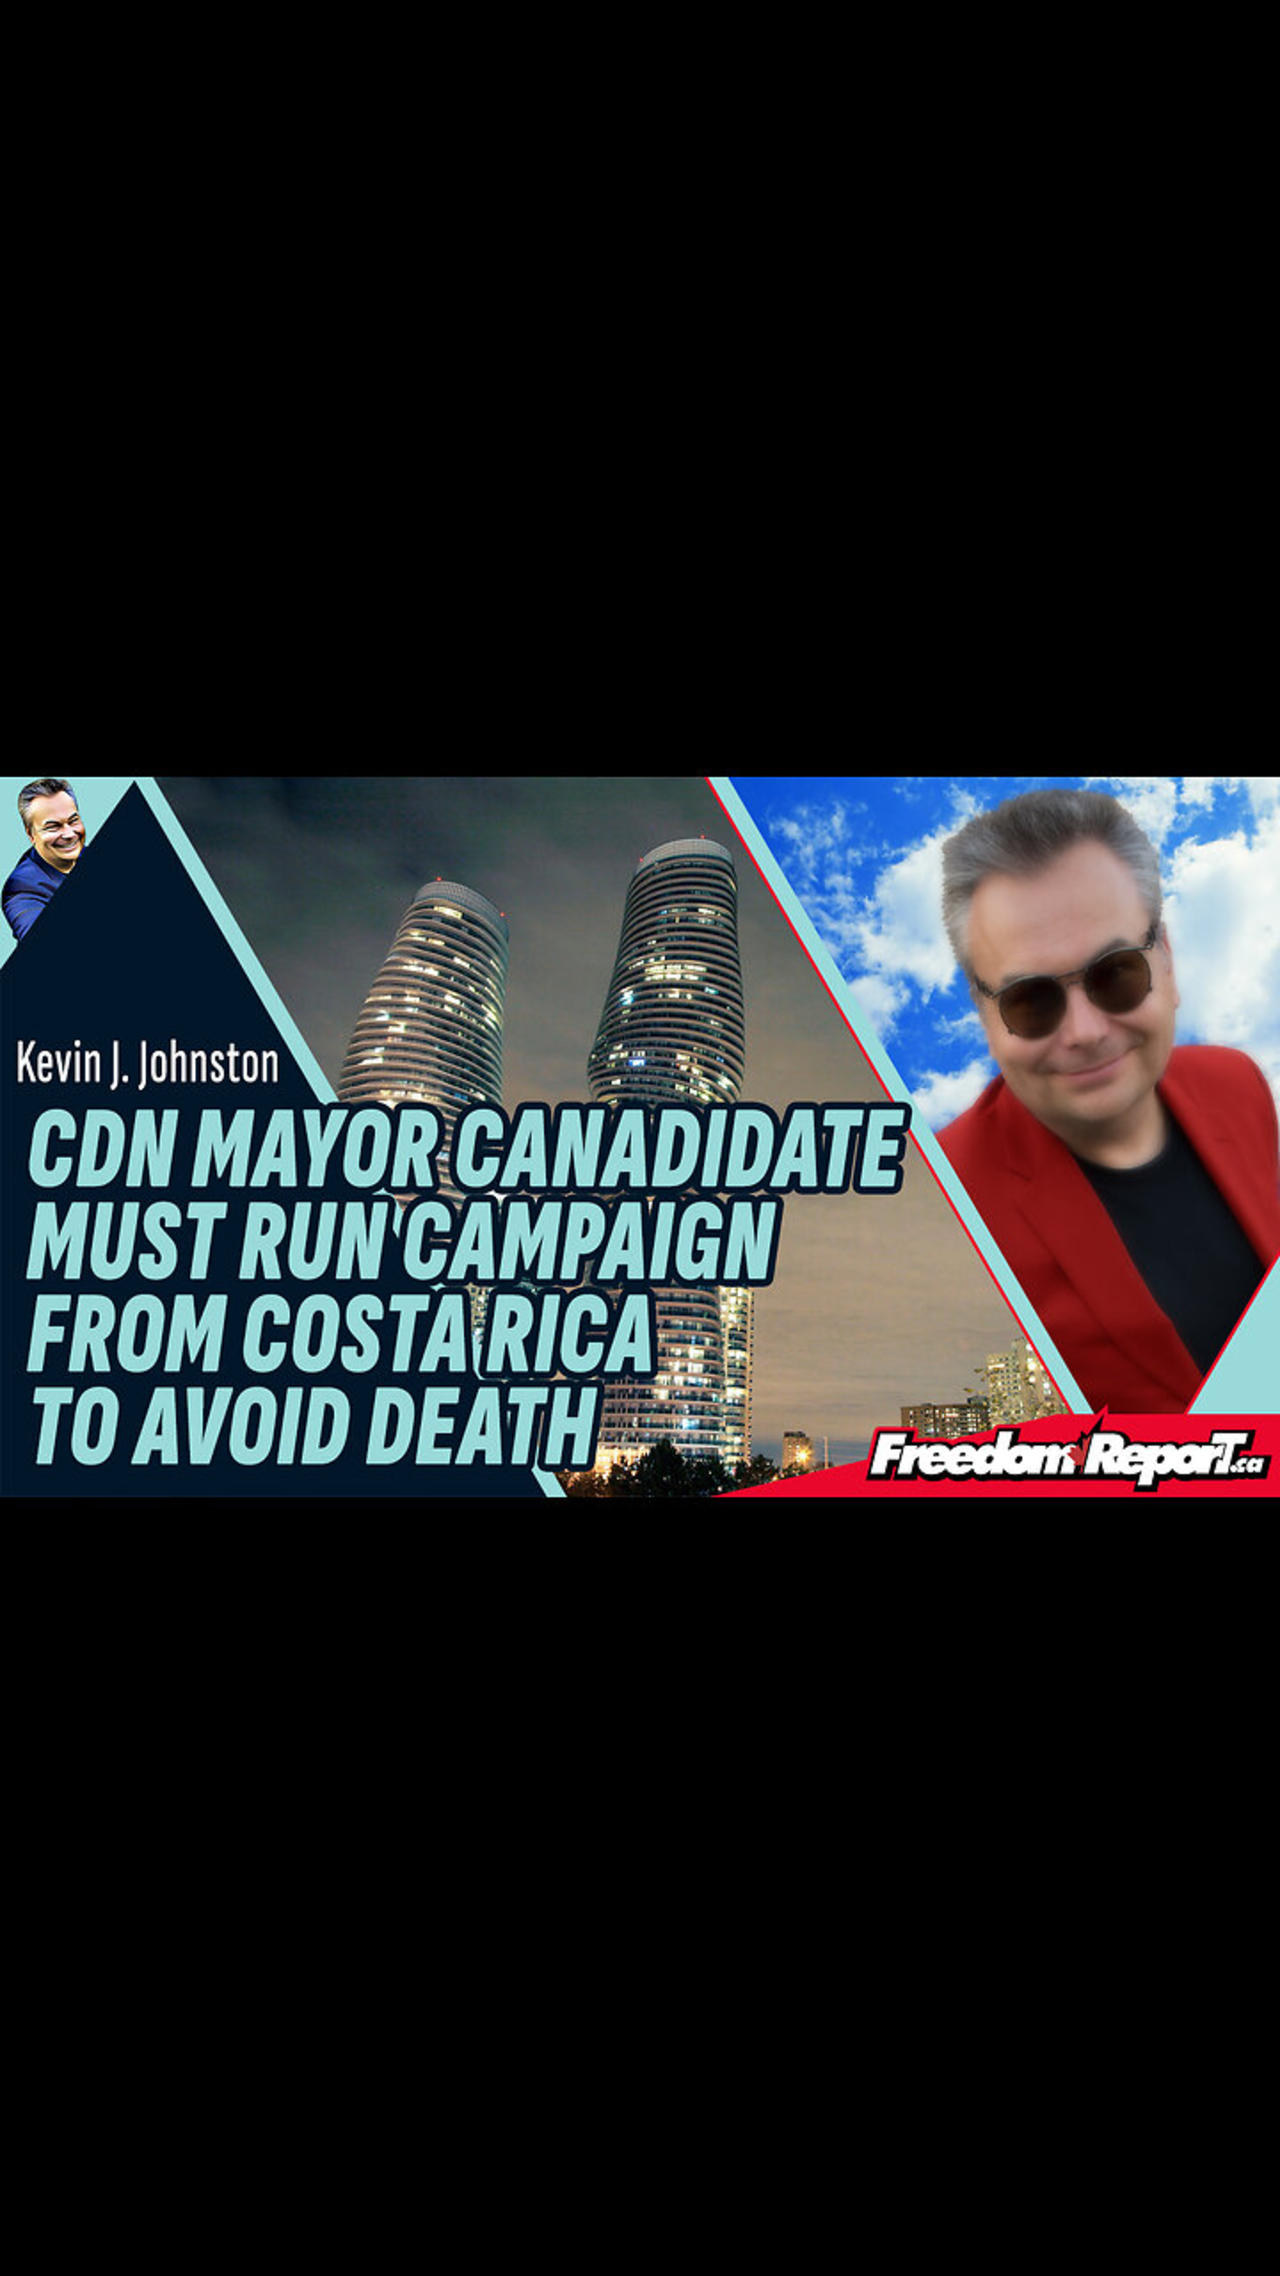 CANADIAN MAYOR CANDIDATE MUST RUN CAMPAIGN FROM COSTA RICA TO AVOID DEATH